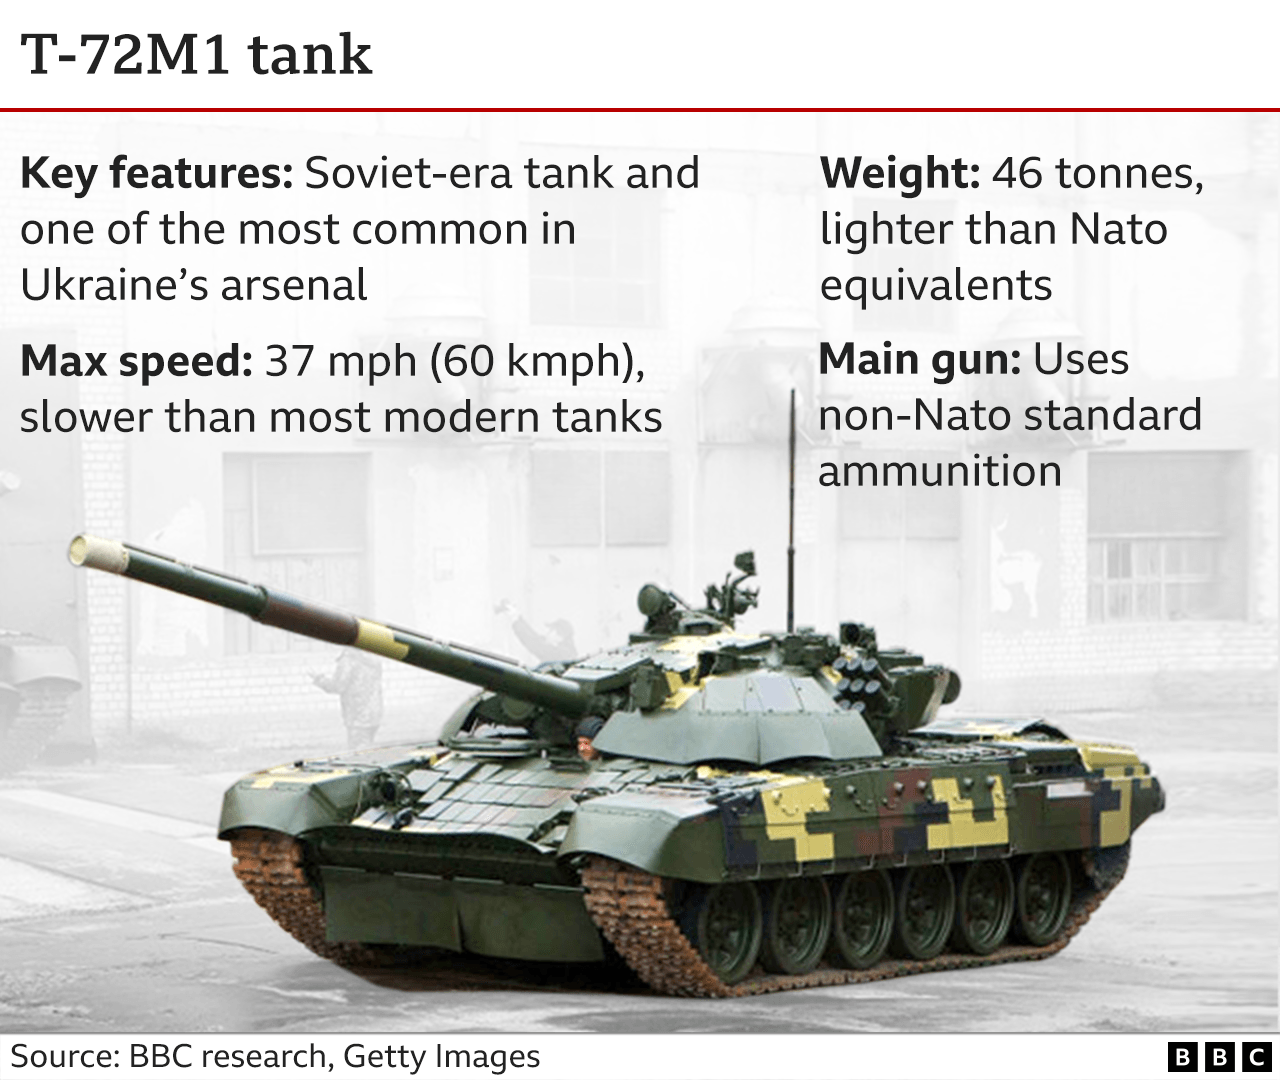 Graphic showing characteristics of the Soviet-era T-72 tank. The T-72 is lighter and slower than most modern tanks, but is one the most common tanks in Ukraine's arsenal.